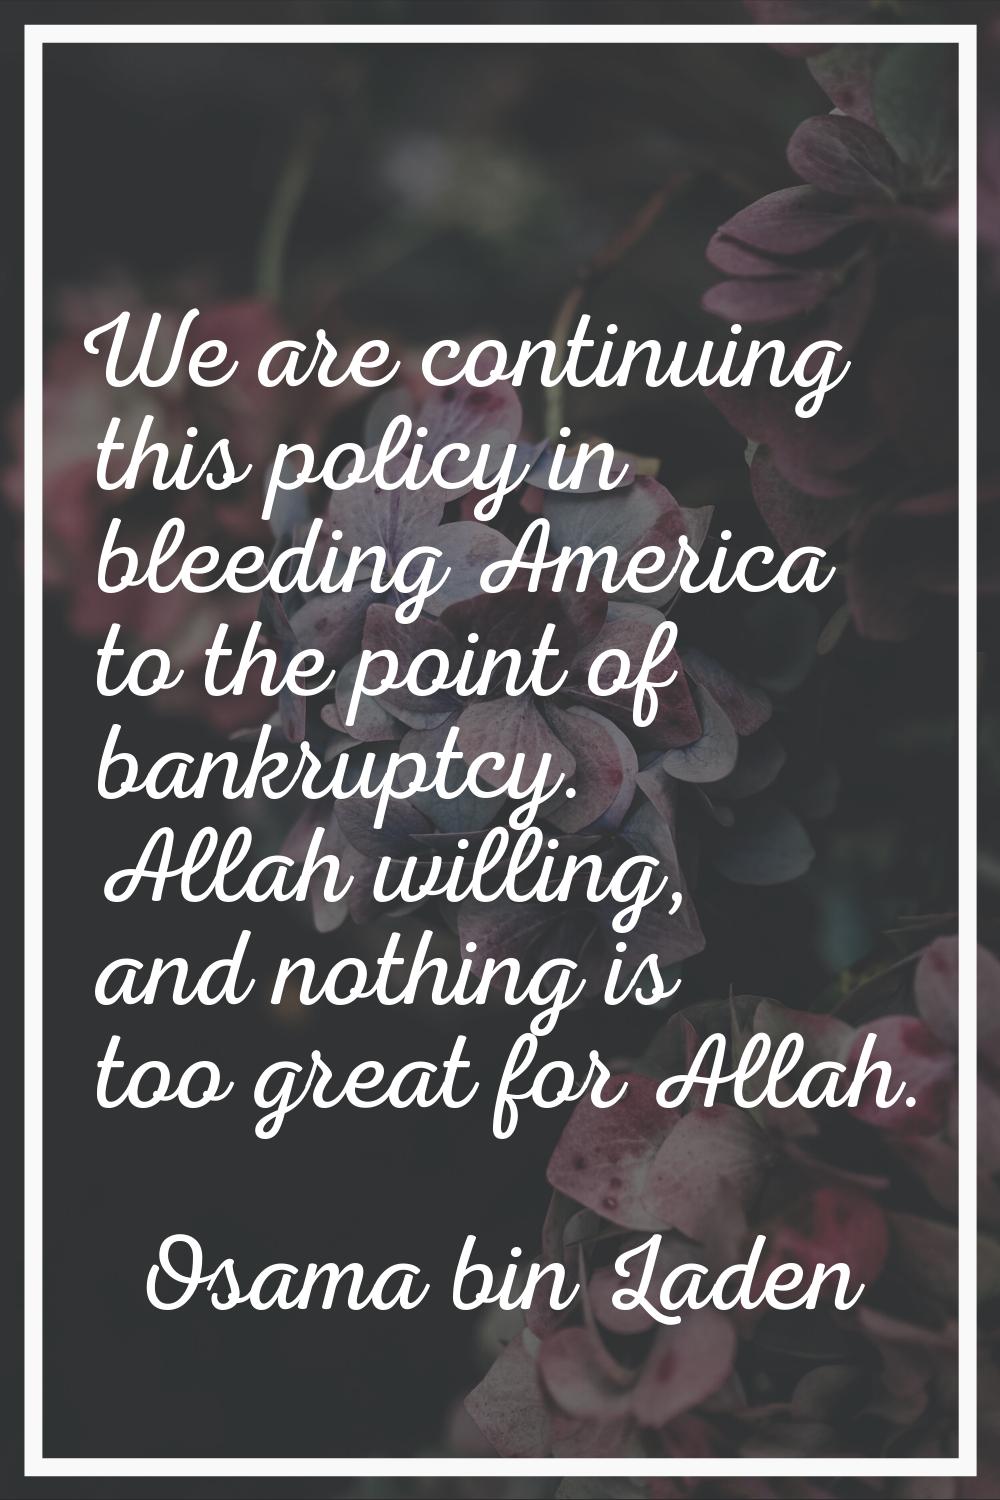 We are continuing this policy in bleeding America to the point of bankruptcy. Allah willing, and no